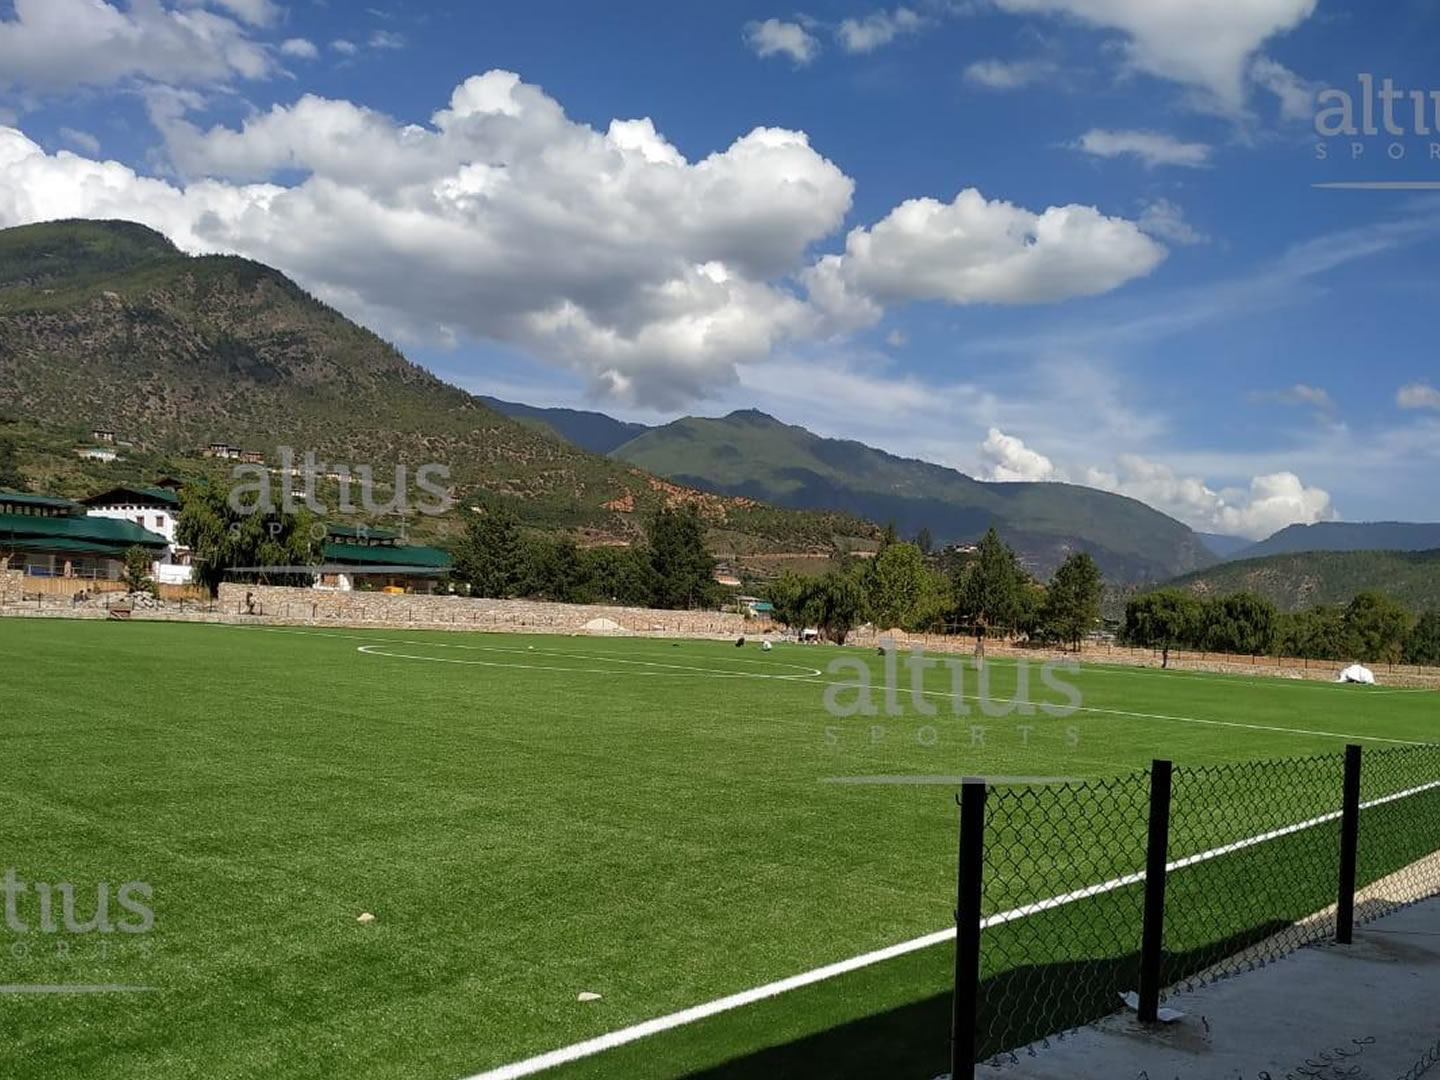 All-weather artificial grass